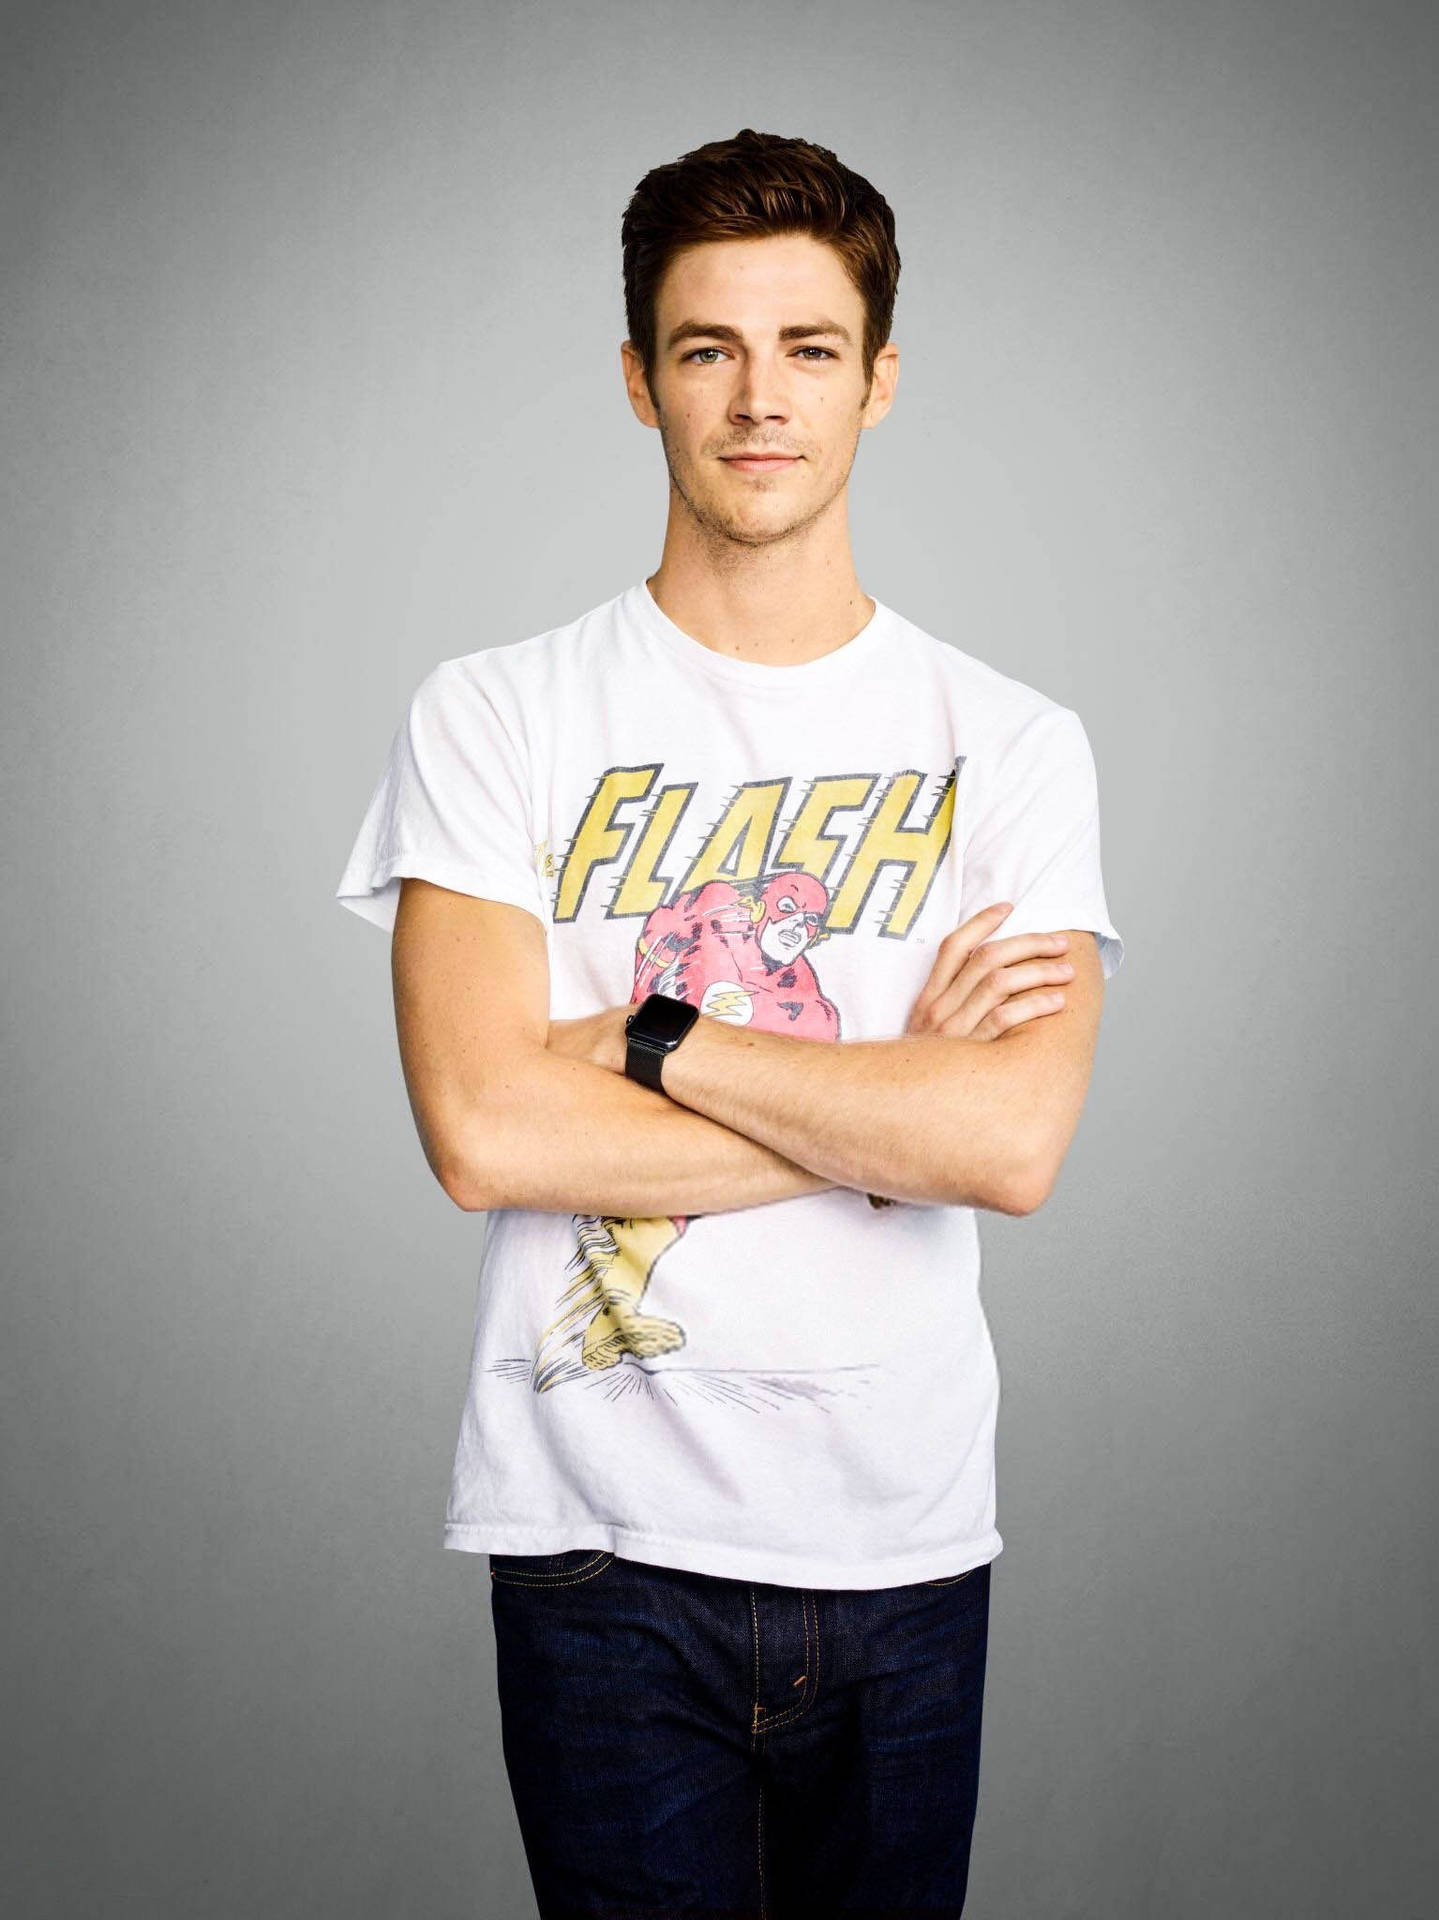 Grant Gustin The Flash Merchandise Background